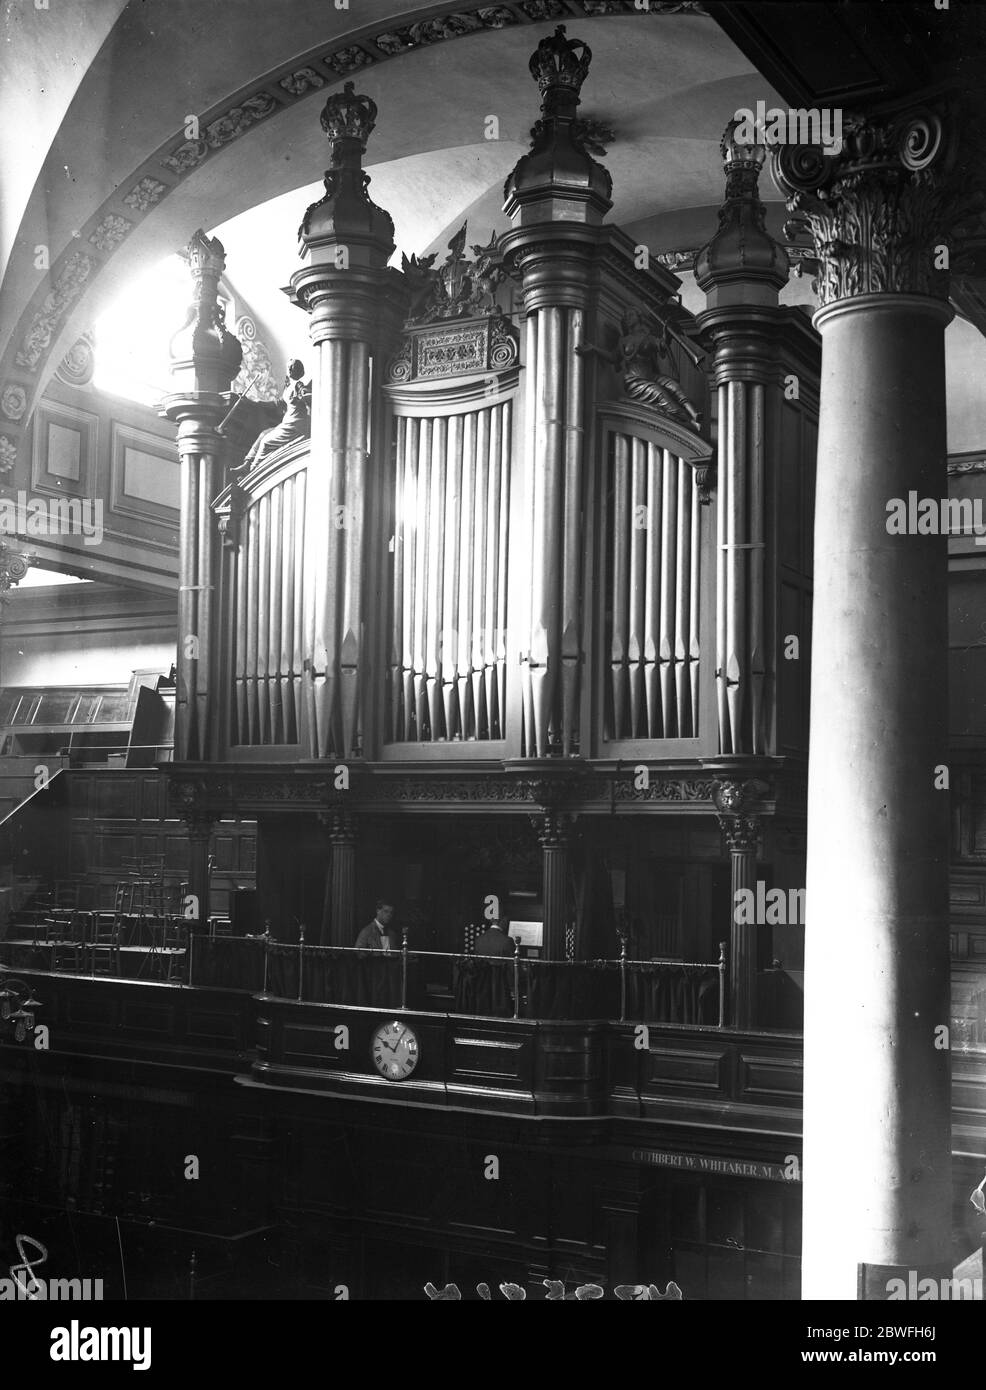 Mendelssohn ' s Organ After extensive repairs the famous 200 year old organ built by Renatus Harris , and a favourite instrument of Mendelssohn , has been re - opened at Christ Church , Newgate Street 20 October 1922 Stock Photo